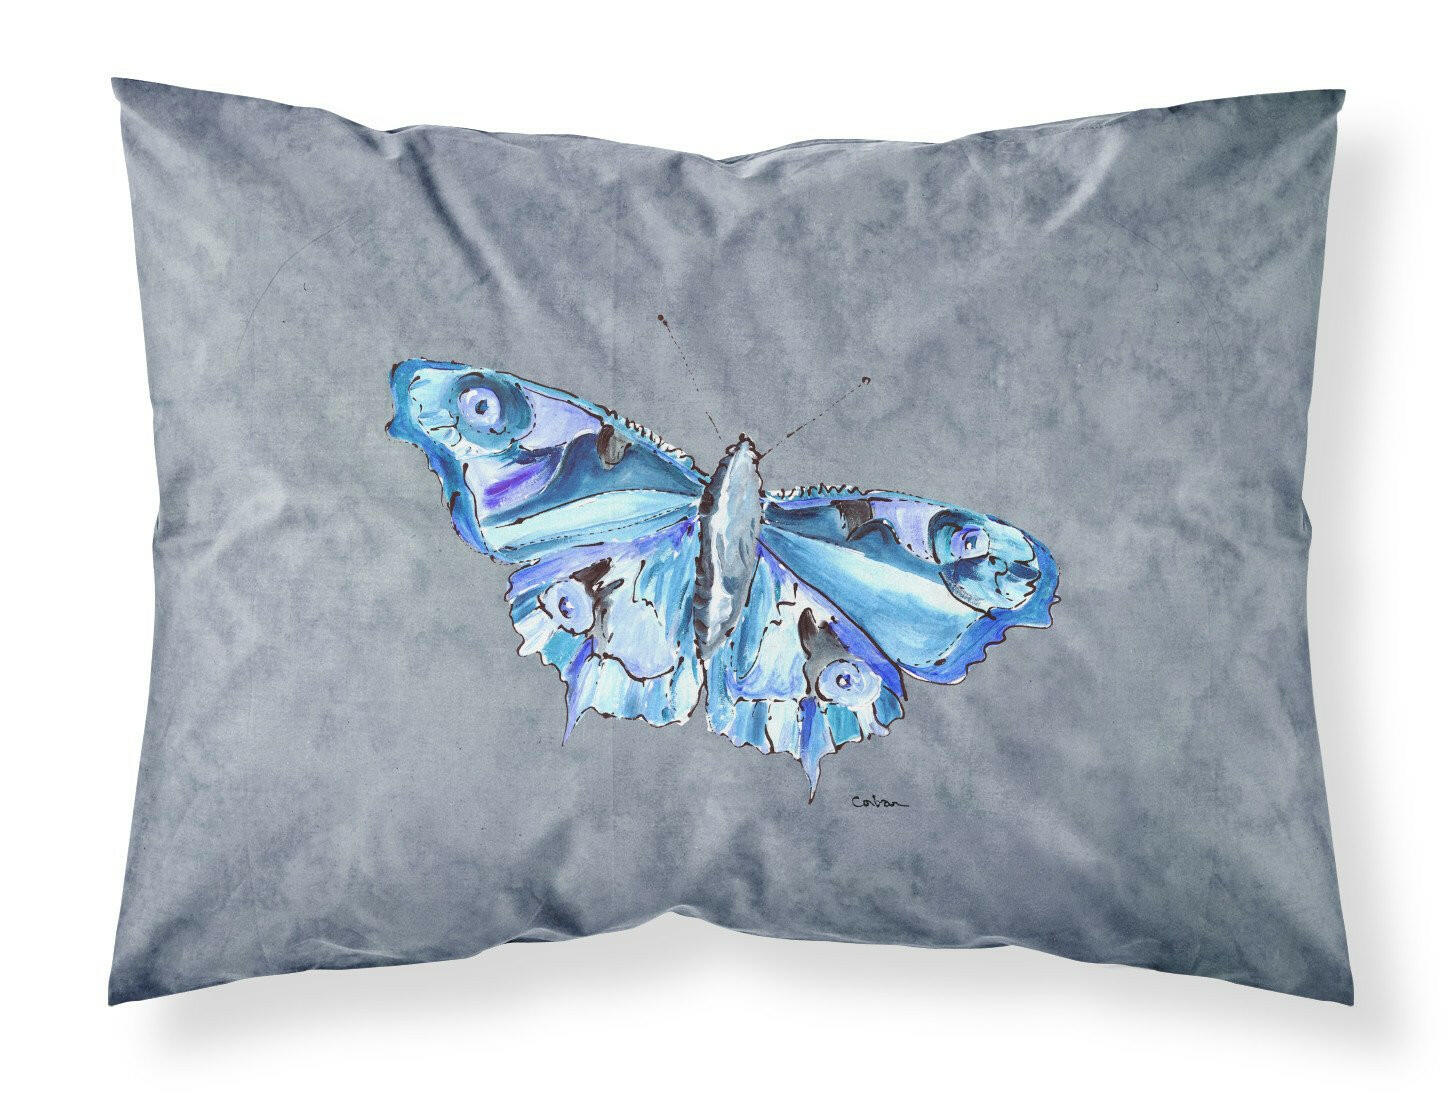 Butterfly on Gray Moisture wicking Fabric standard pillowcase by Caroline's Treasures